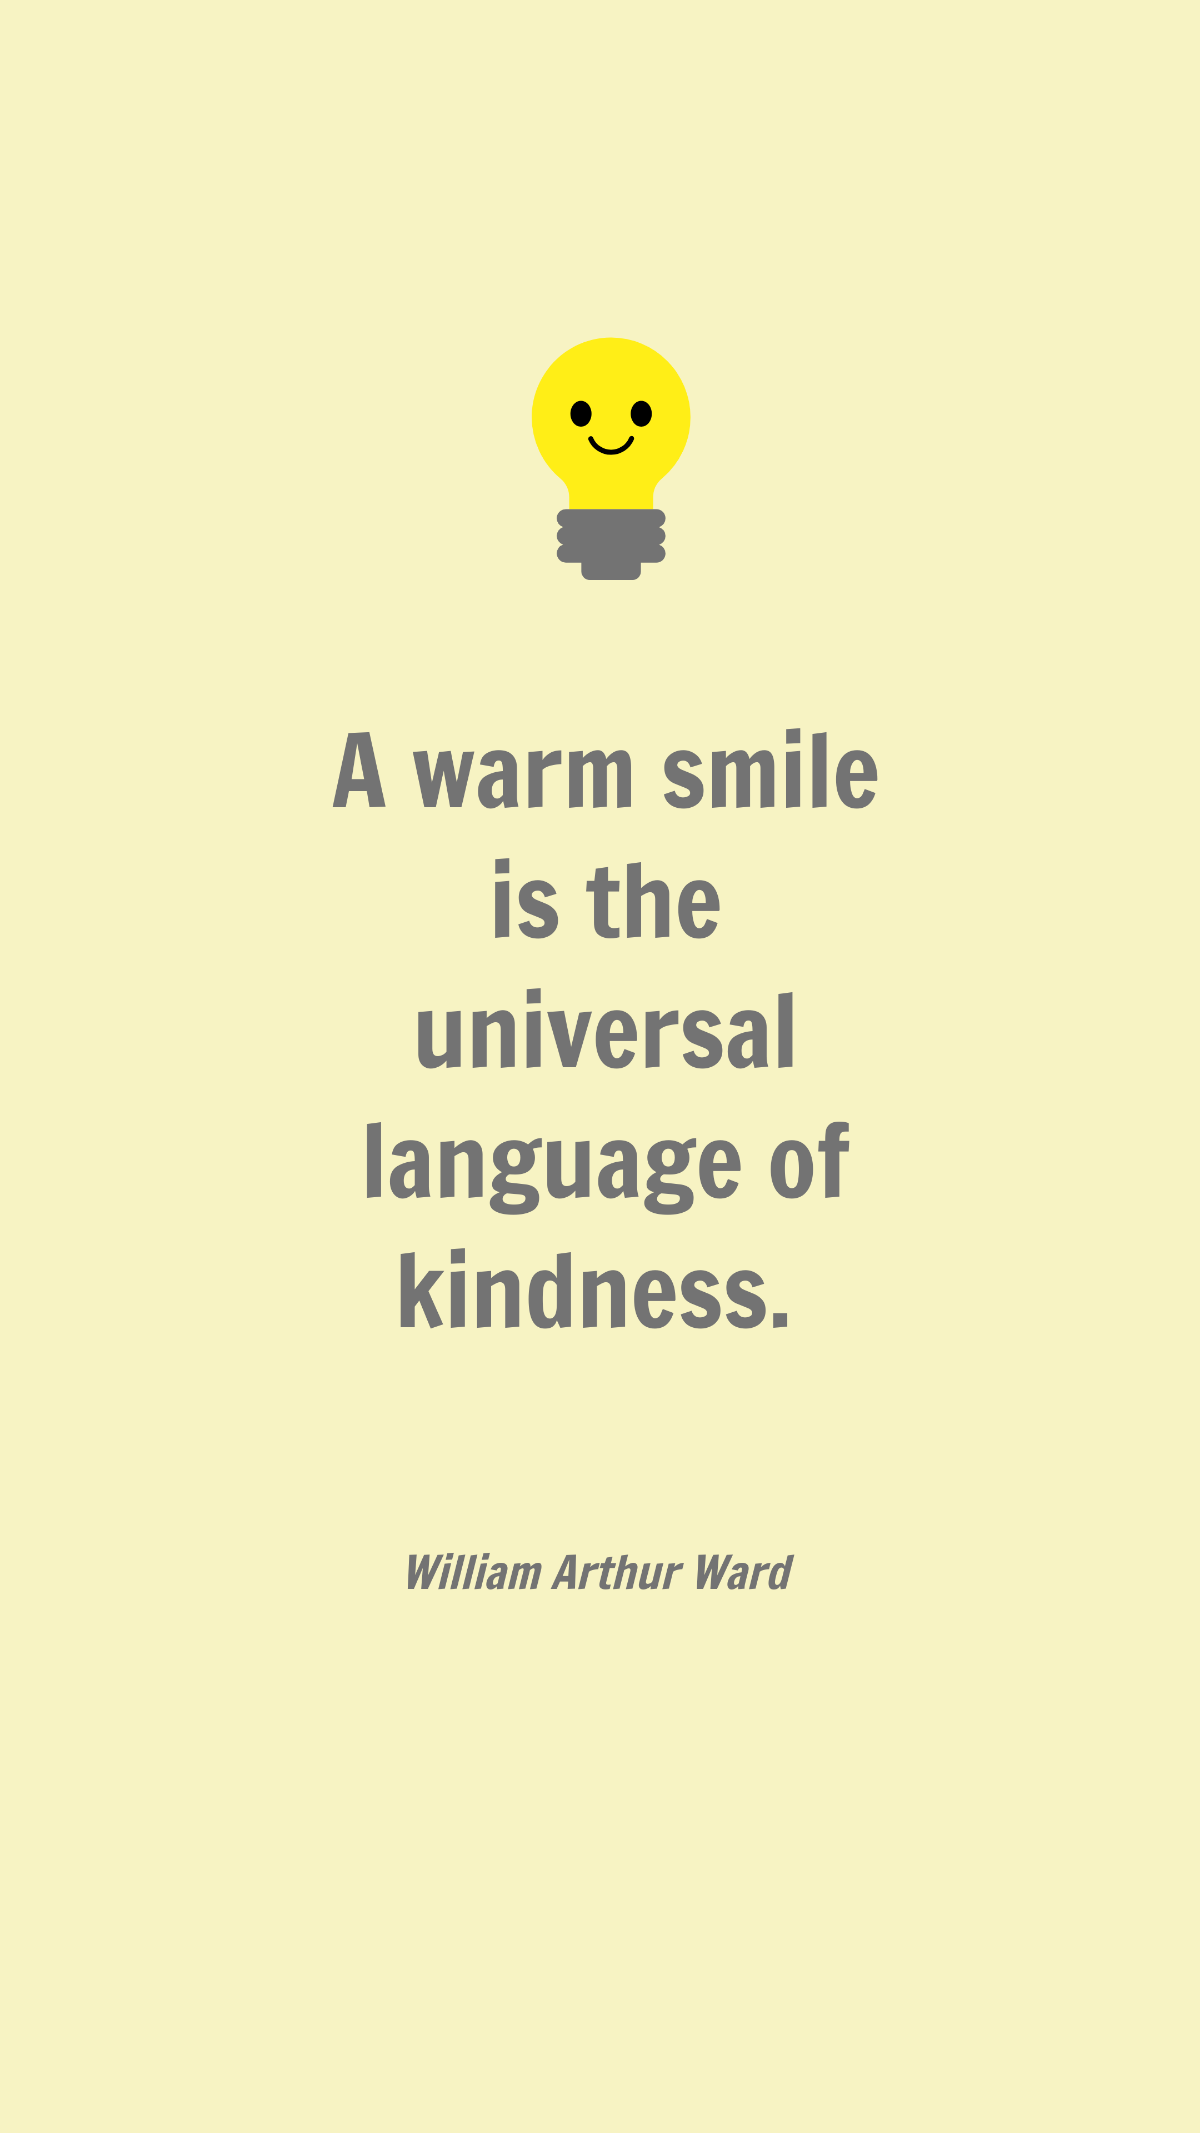 William Arthur Ward - A warm smile is the universal language of kindness. Template